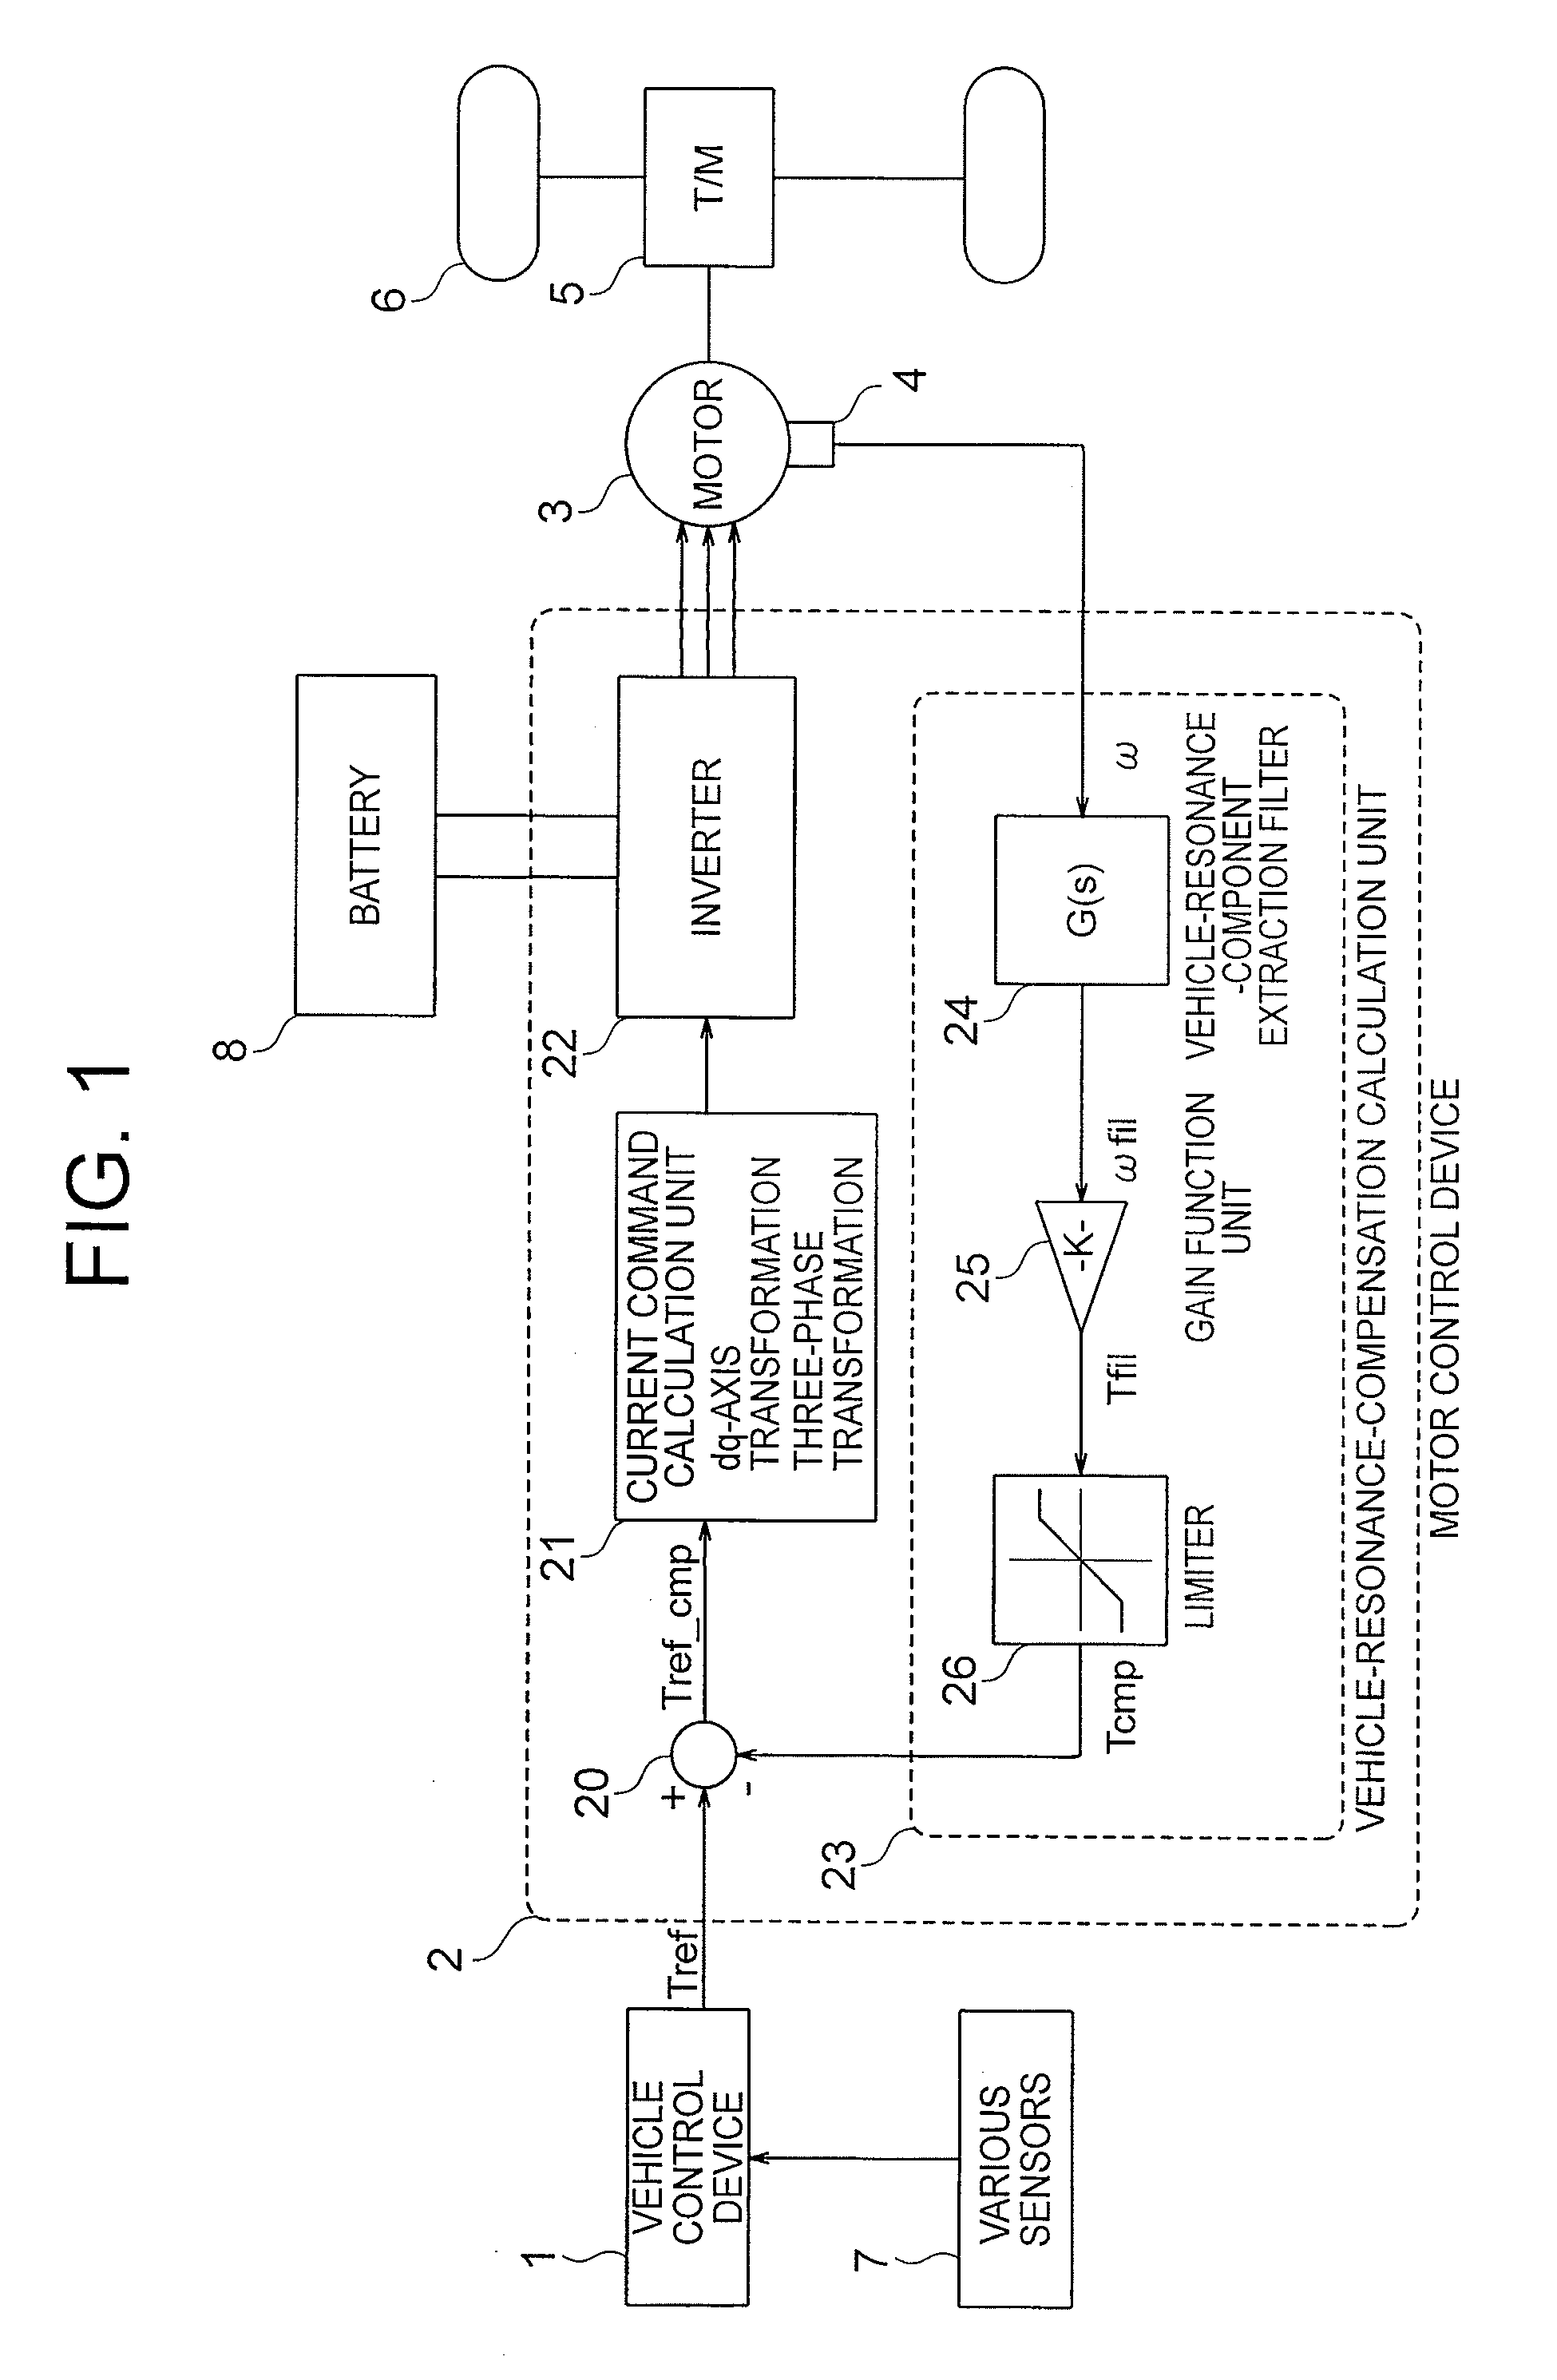 Motor control device for vehicle